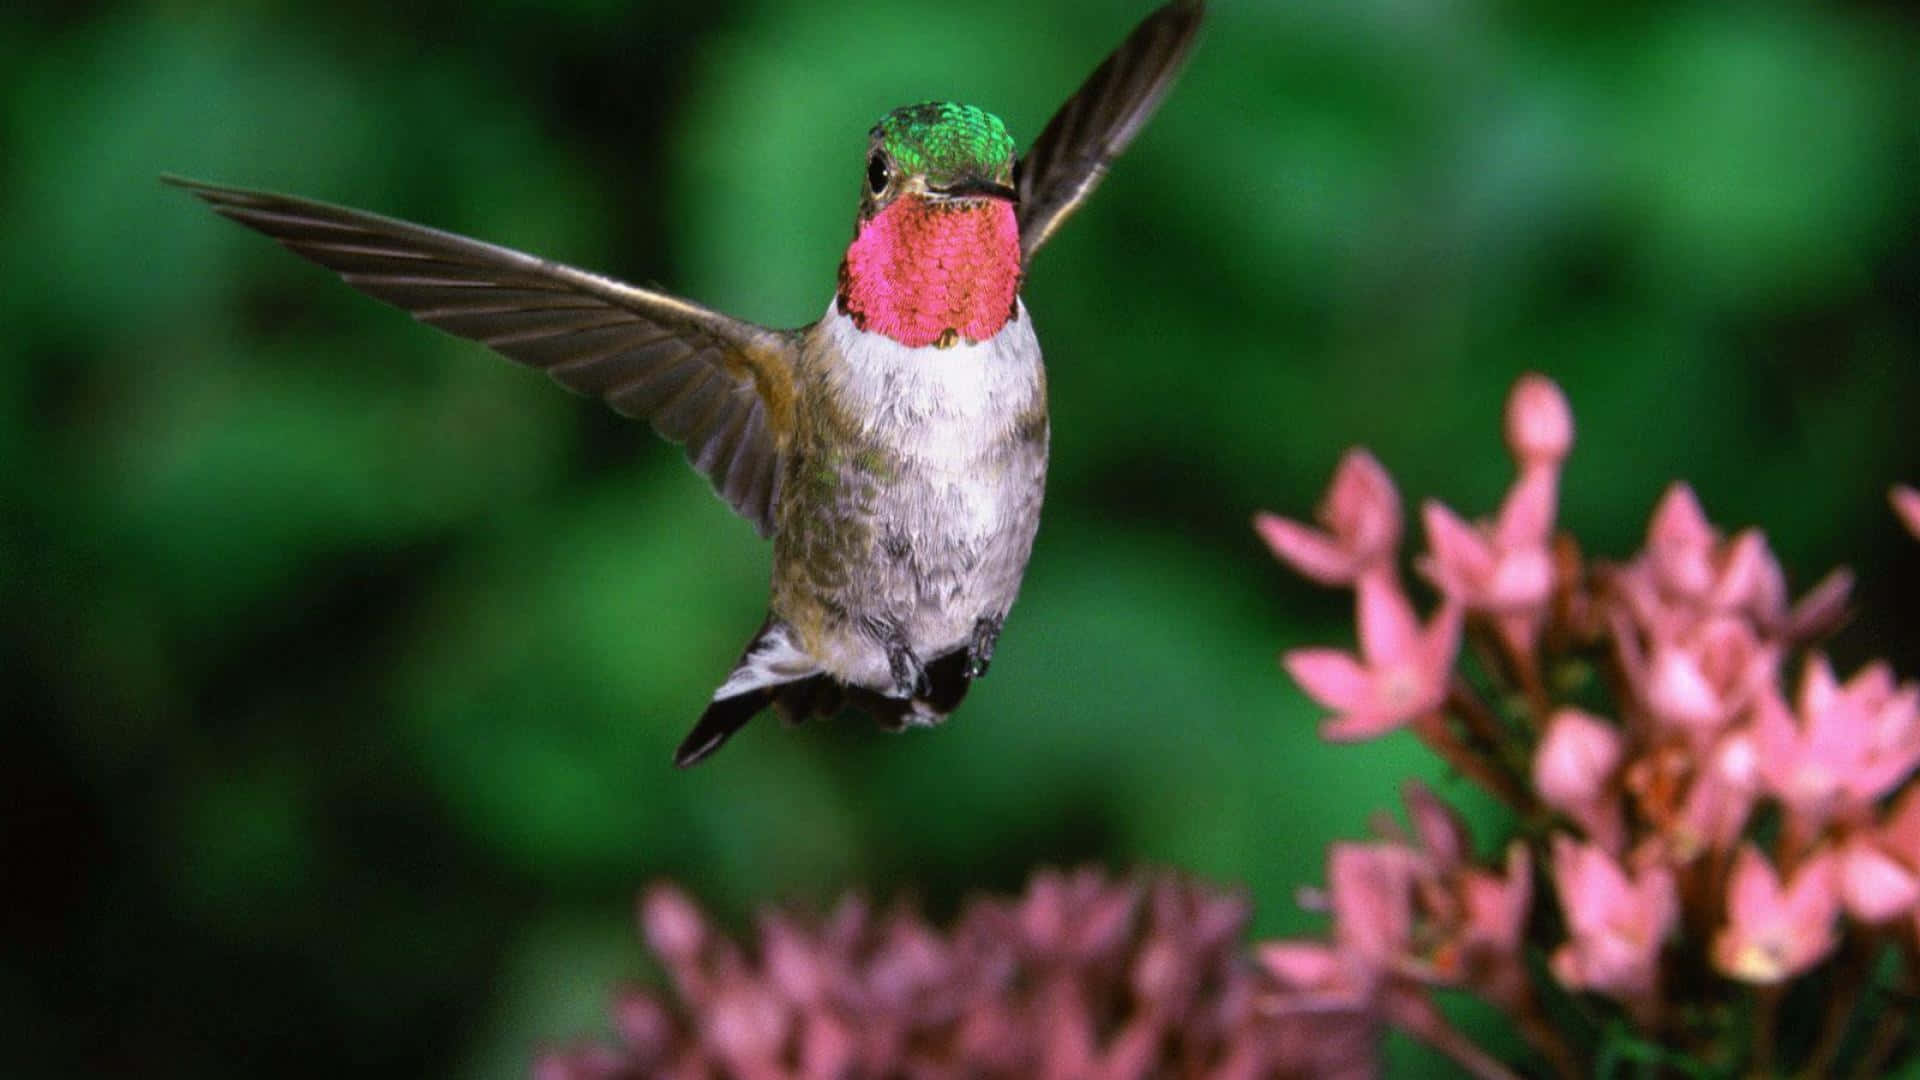 A colorful hummingbird delightfully hovering outside a window.